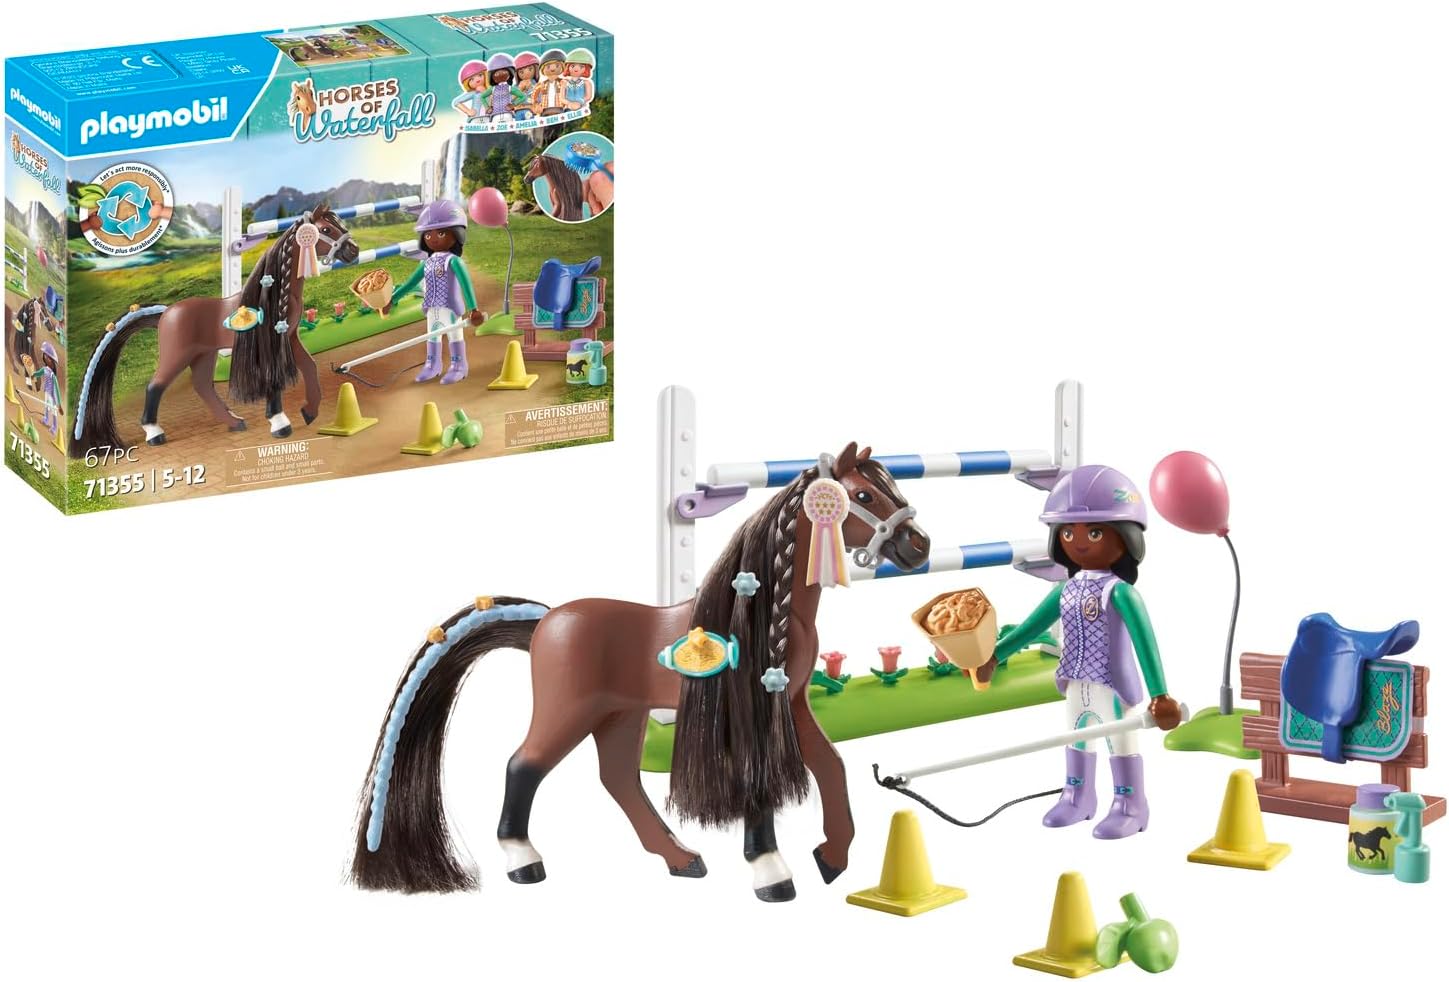 PLAYMOBIL Horses of Waterfall 71355 Zoe & Blaze with Tournament Course, Intensive Training for the Championship, with Numerous Accessories and Rewards, Sustainable Toy for Children from 5 Years